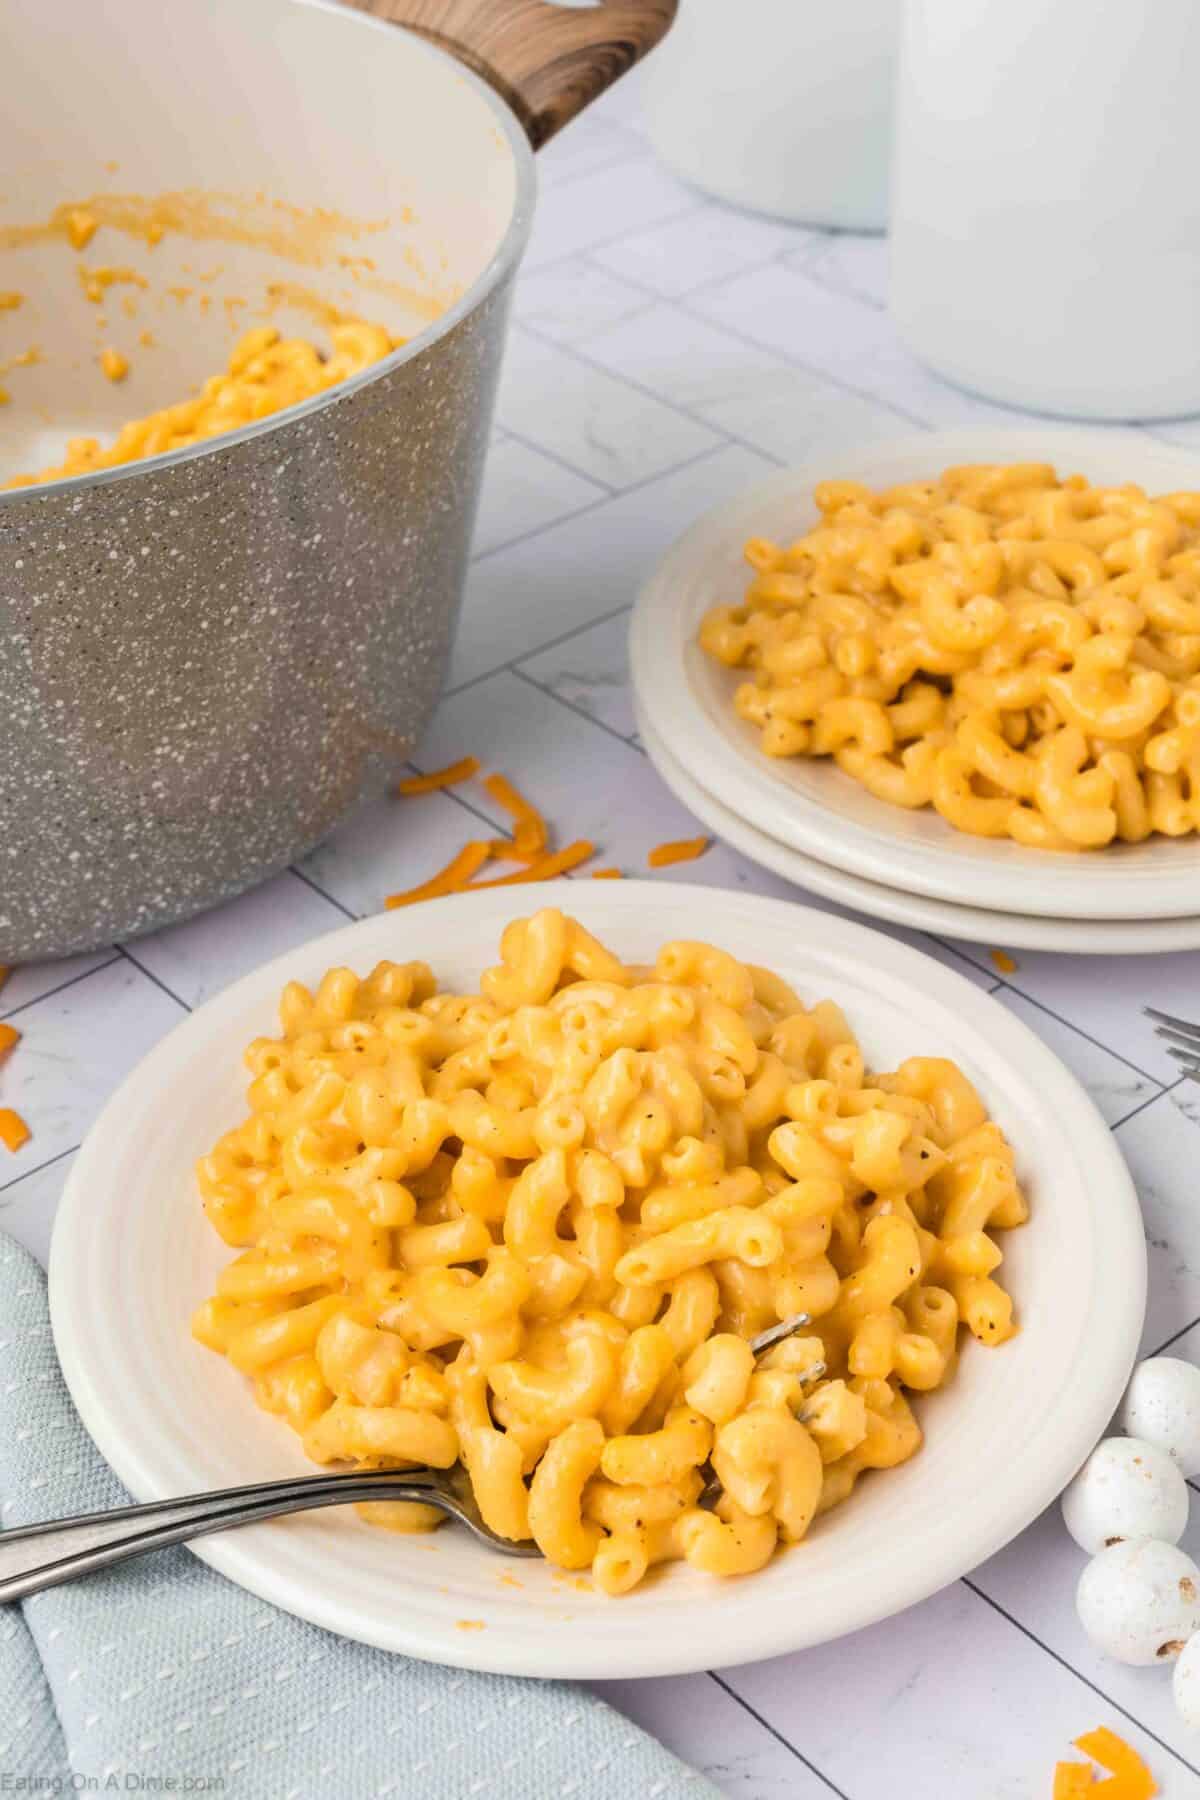 Two plates of creamy macaroni and cheese are set on a table next to a pot filled with more mac and cheese, all from an easy homemade macaroni and cheese recipe. The dishes are garnished with bits of shredded cheddar. Forks rest on the edge of each plate, ready for use.